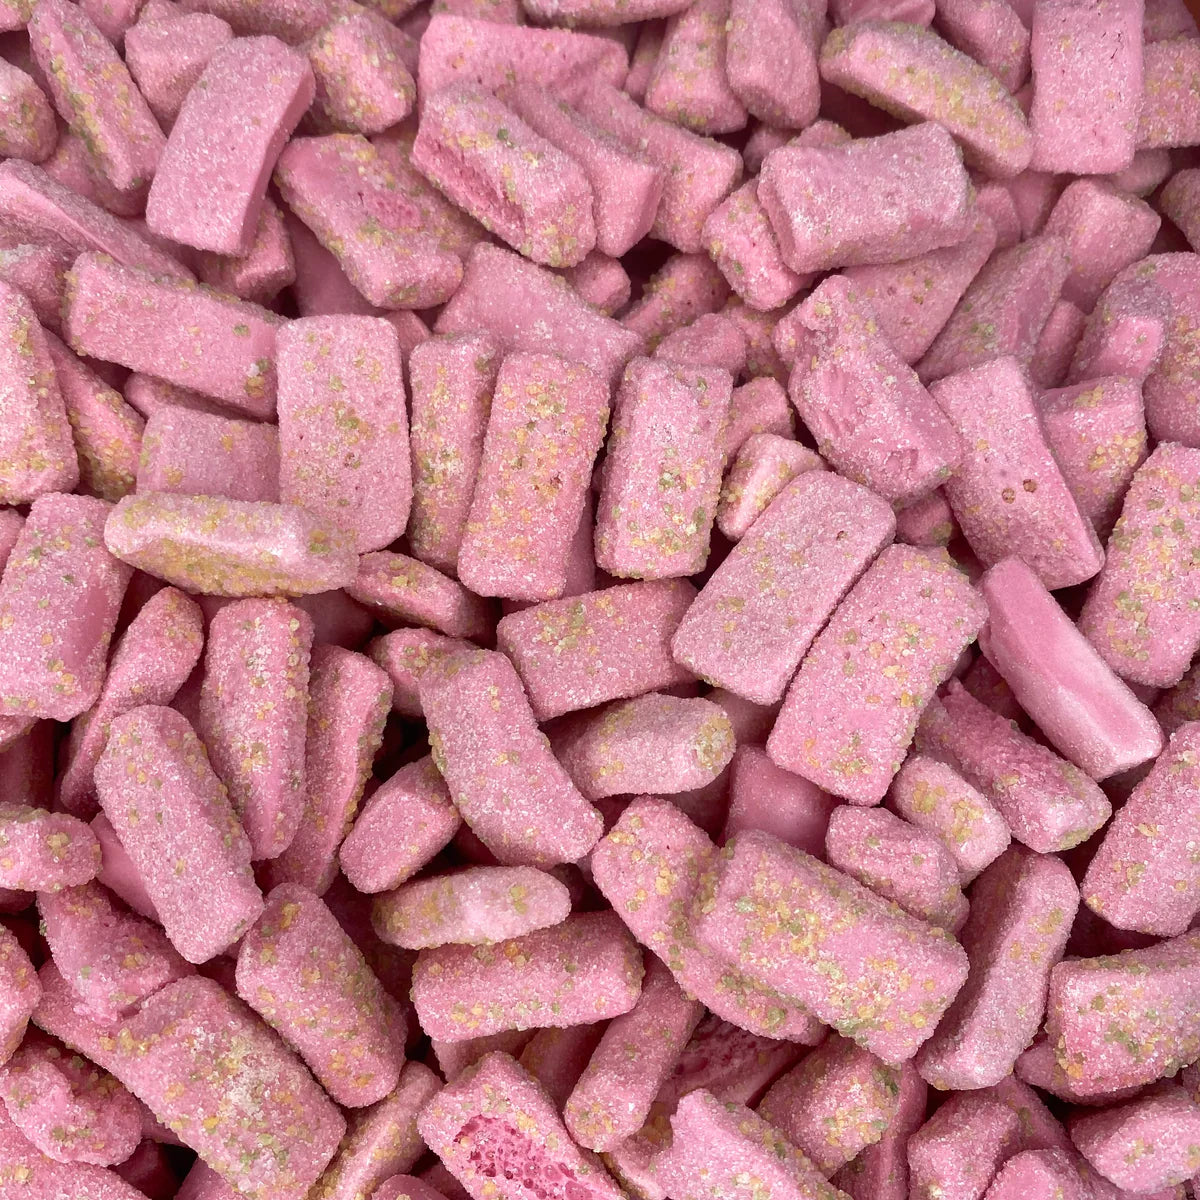 Freeze Dried Single Sweets: 17 Flavours To Choose From